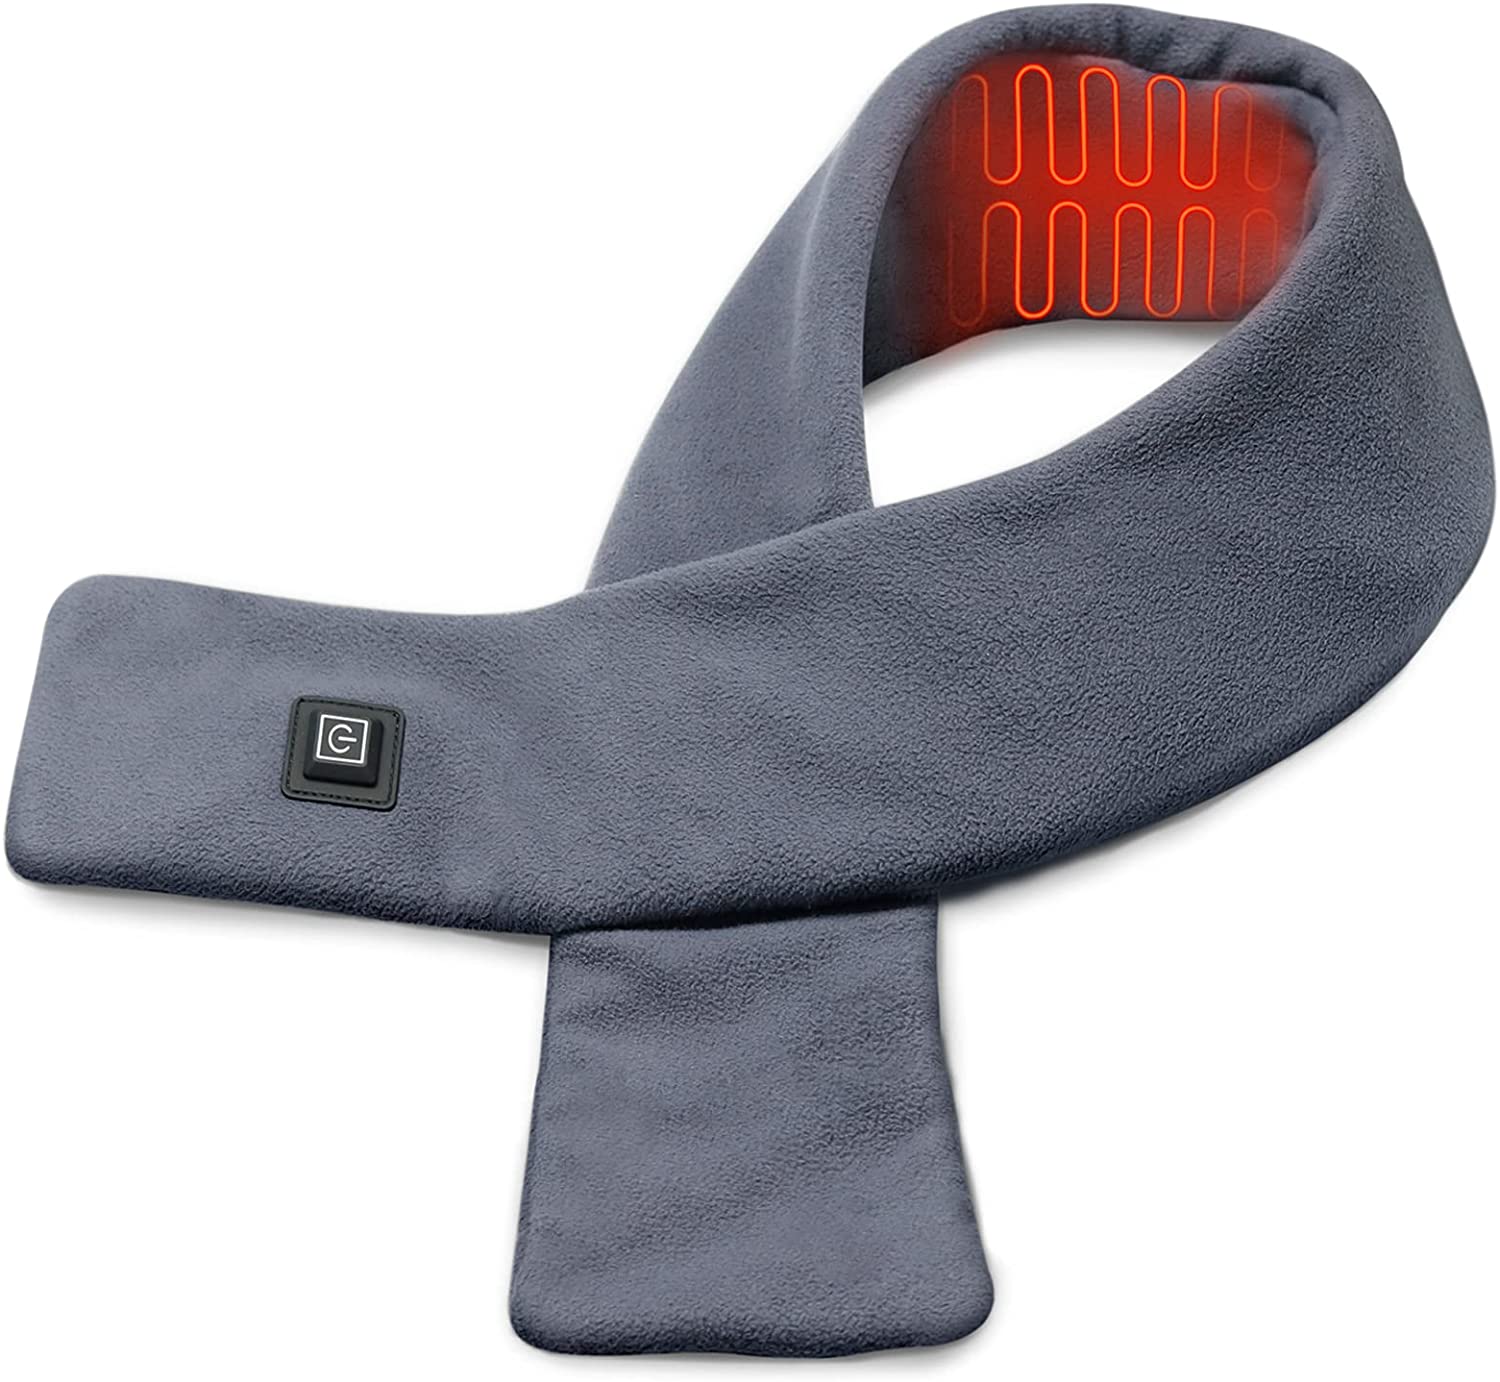 Best Infrared Neck Heating Pad Reviews in 2021 1